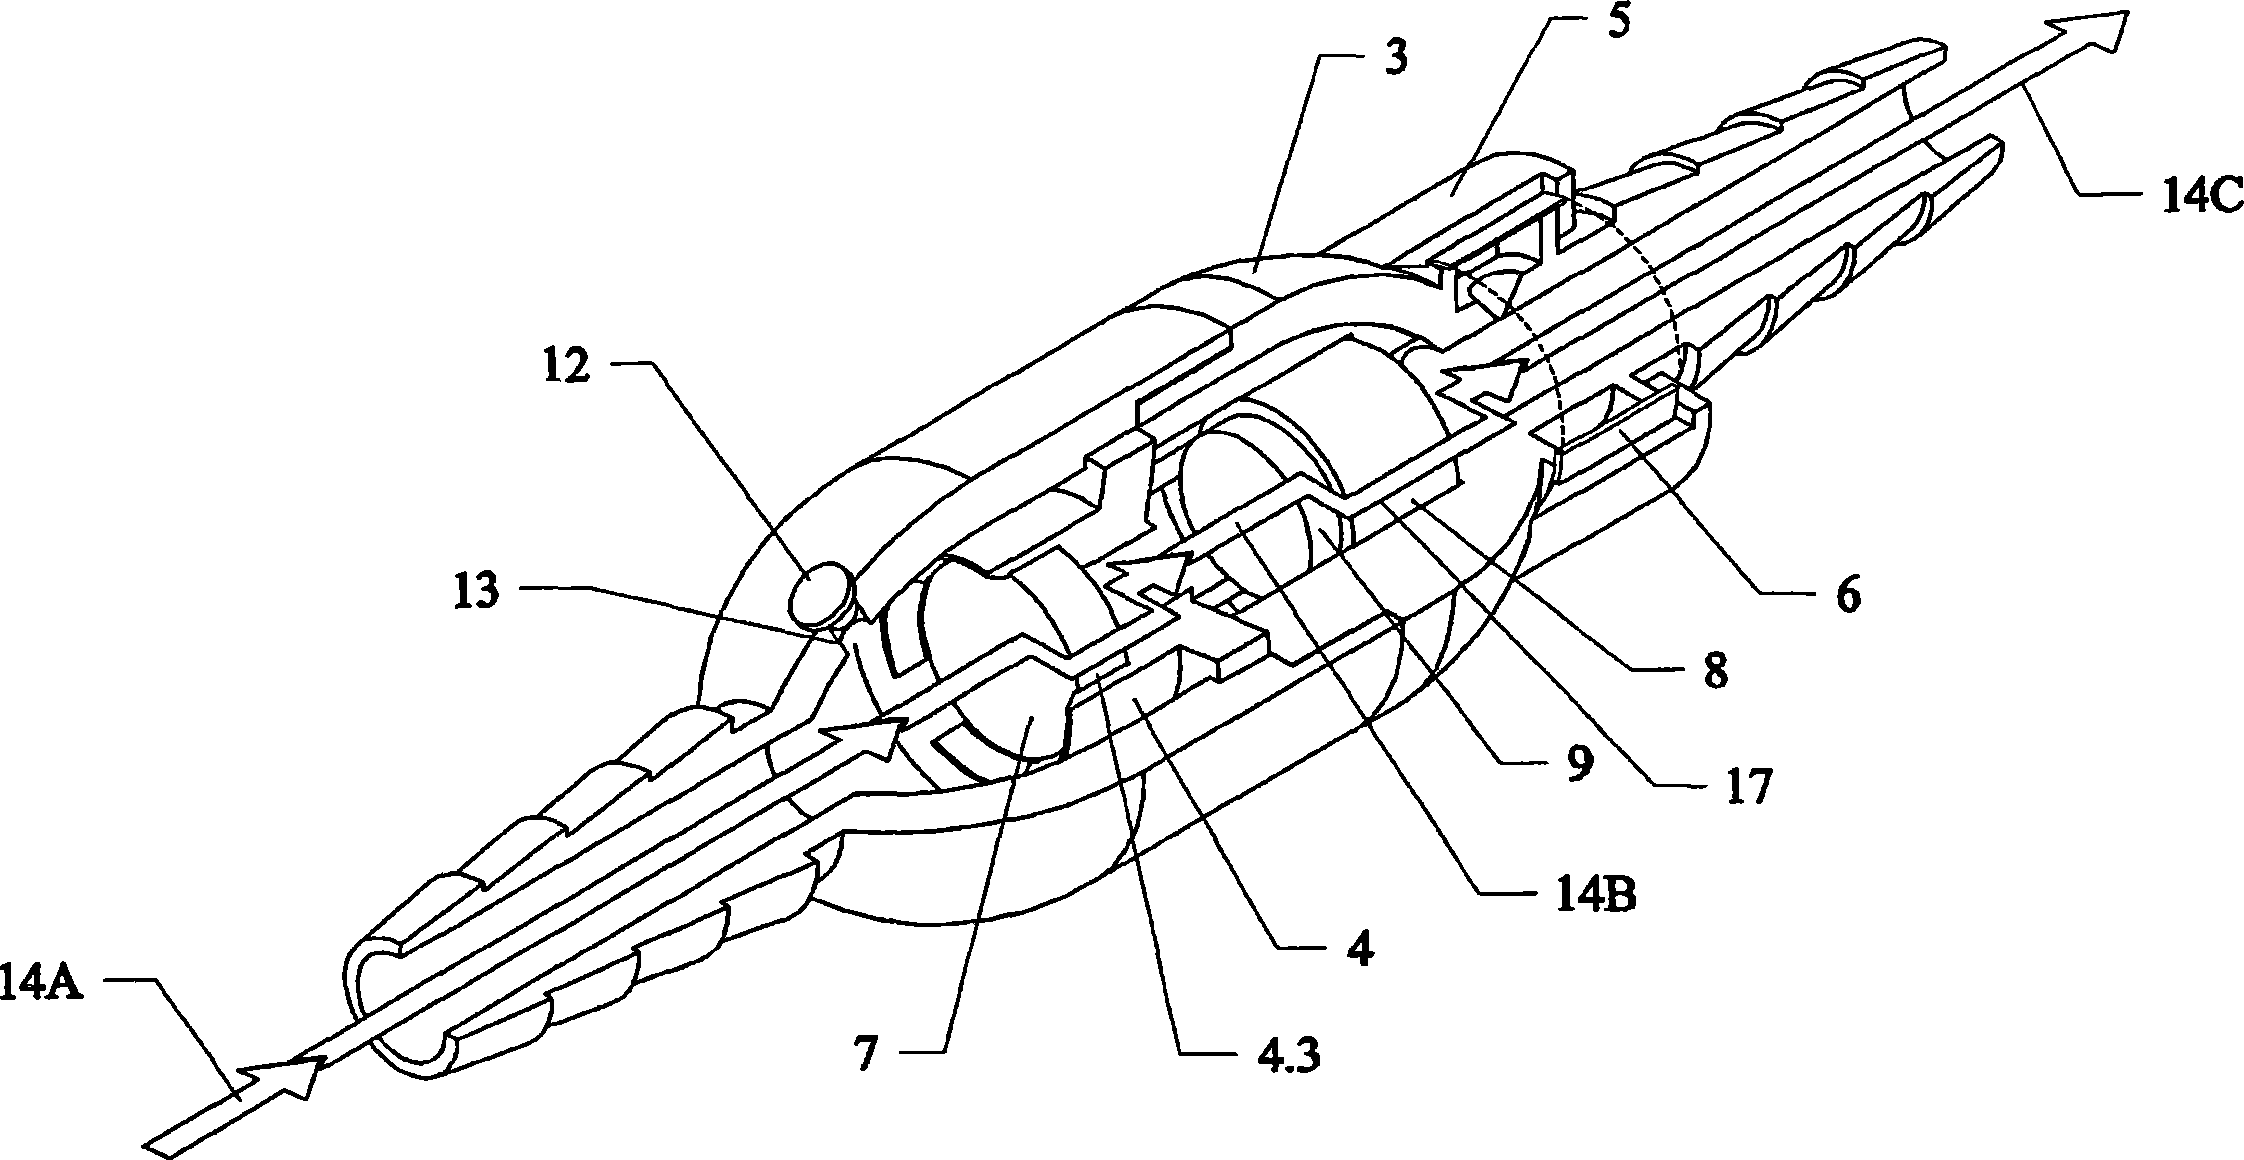 Magnetic valve bladder cycler drainage system and use method with urinary catheters